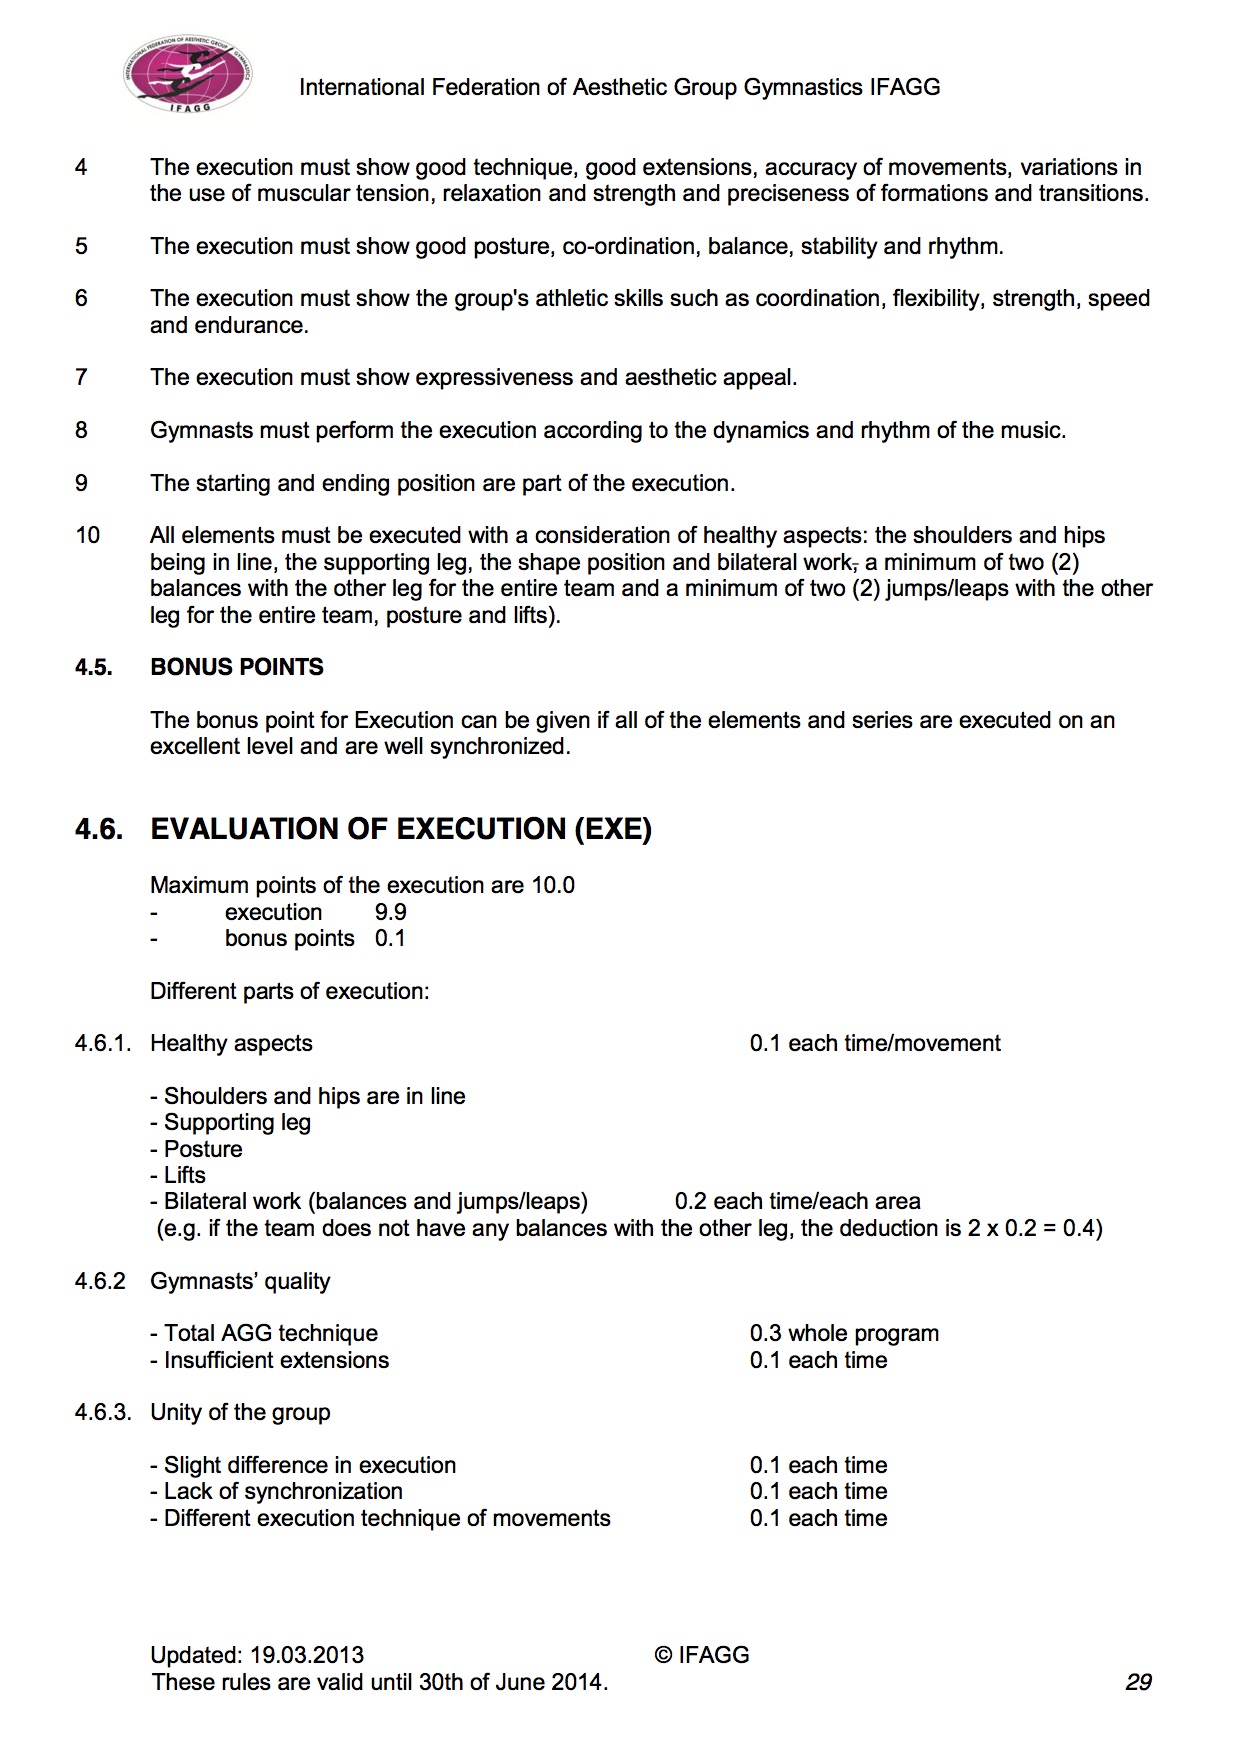 IFAGG Competition rules29.jpg